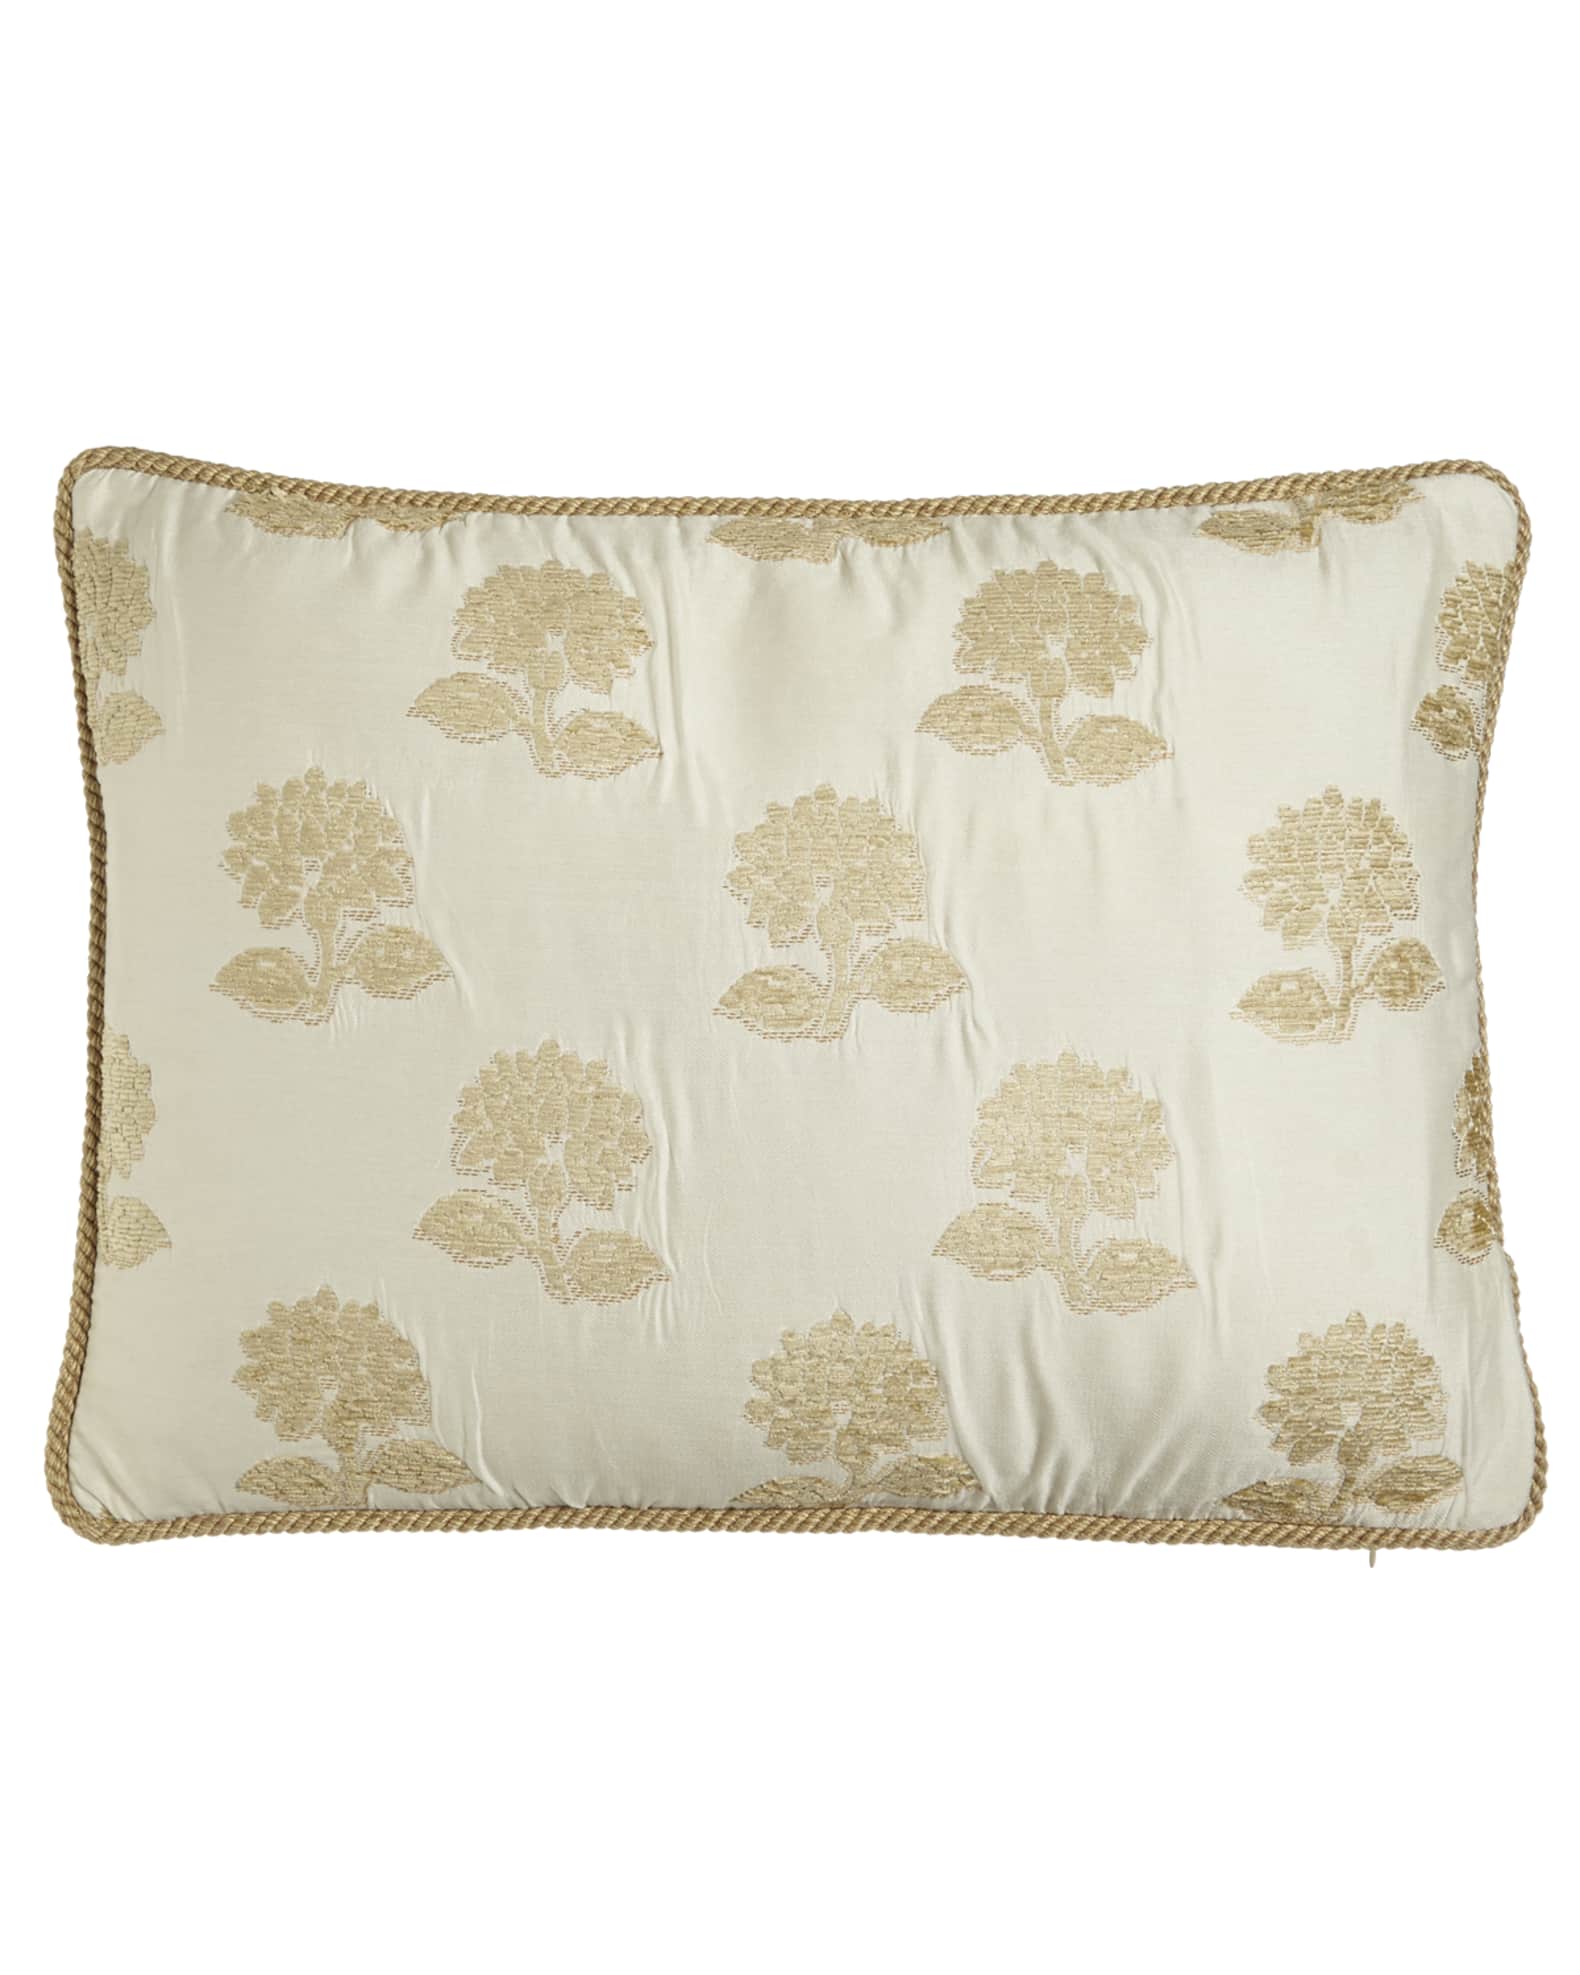 Austin Horn Collection Antoinette Standard Sham with Chenille Flowers & Cord Trim